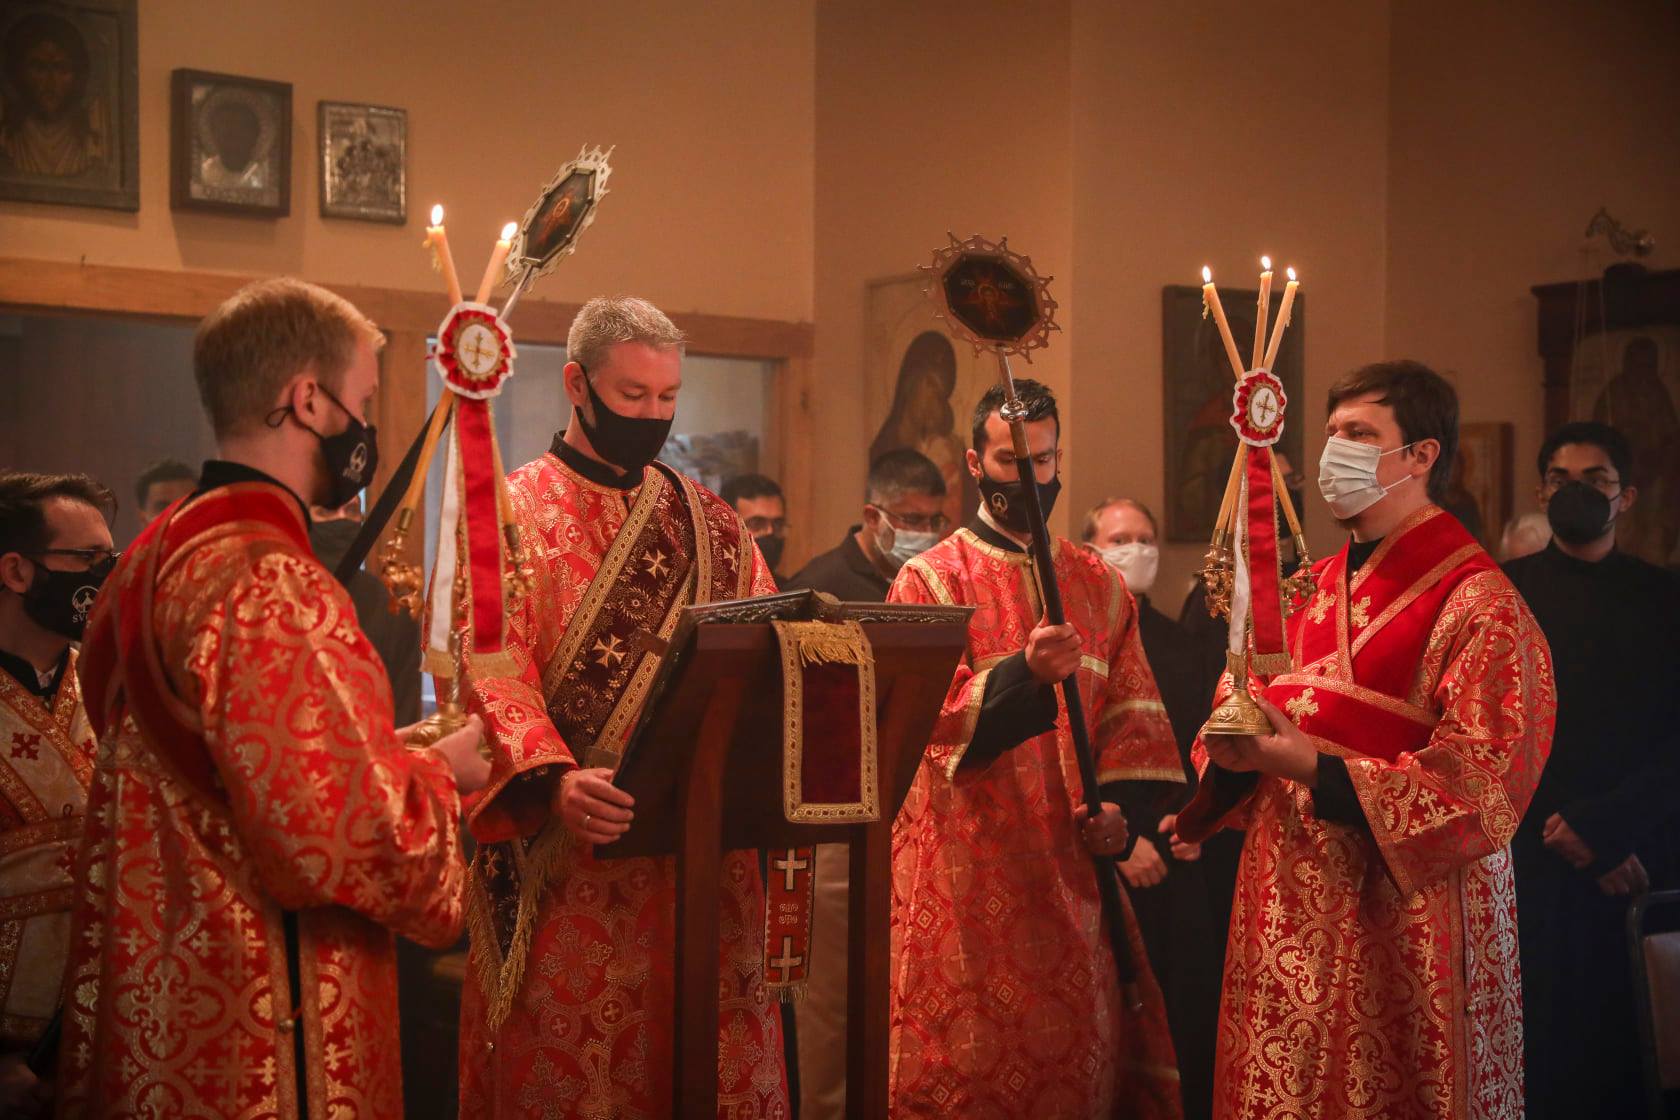 Scenes from Divine Liturgy and ordination of Dn. Vitaly